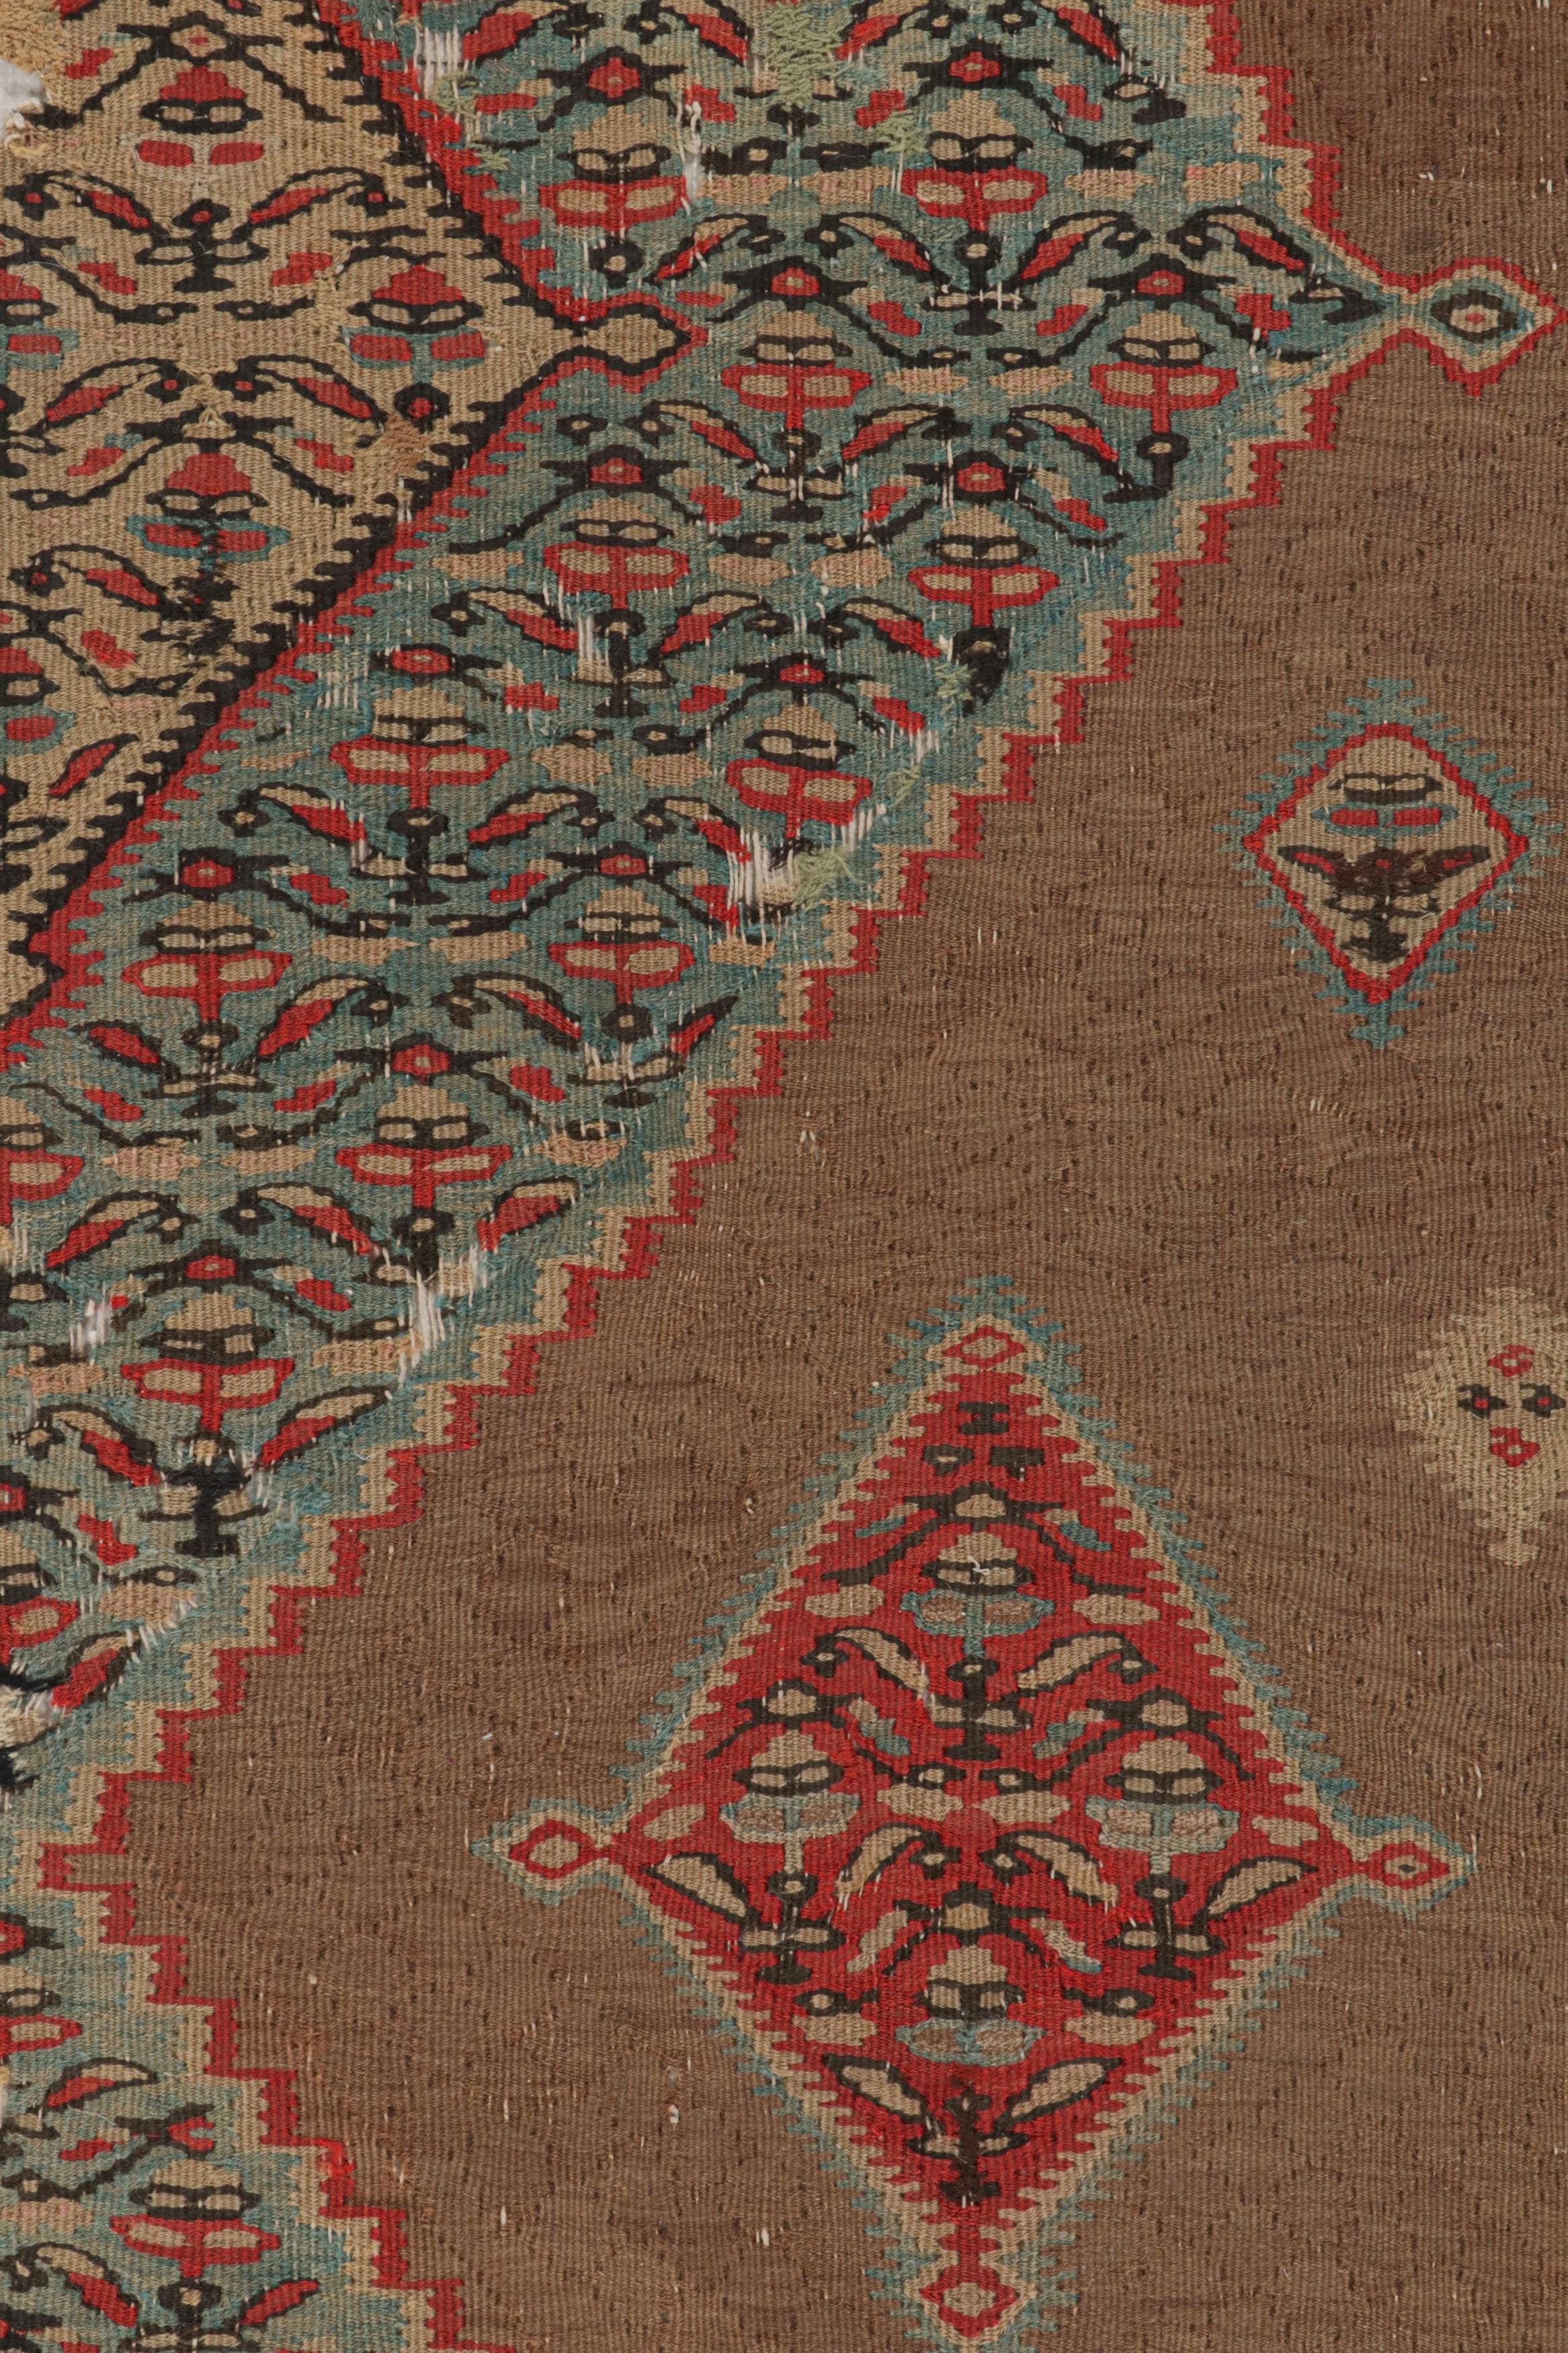 Hand-Knotted Antique Geometric Beige and Red Wool Persian Kilim-Senneh Runner by Rug & Kilim For Sale